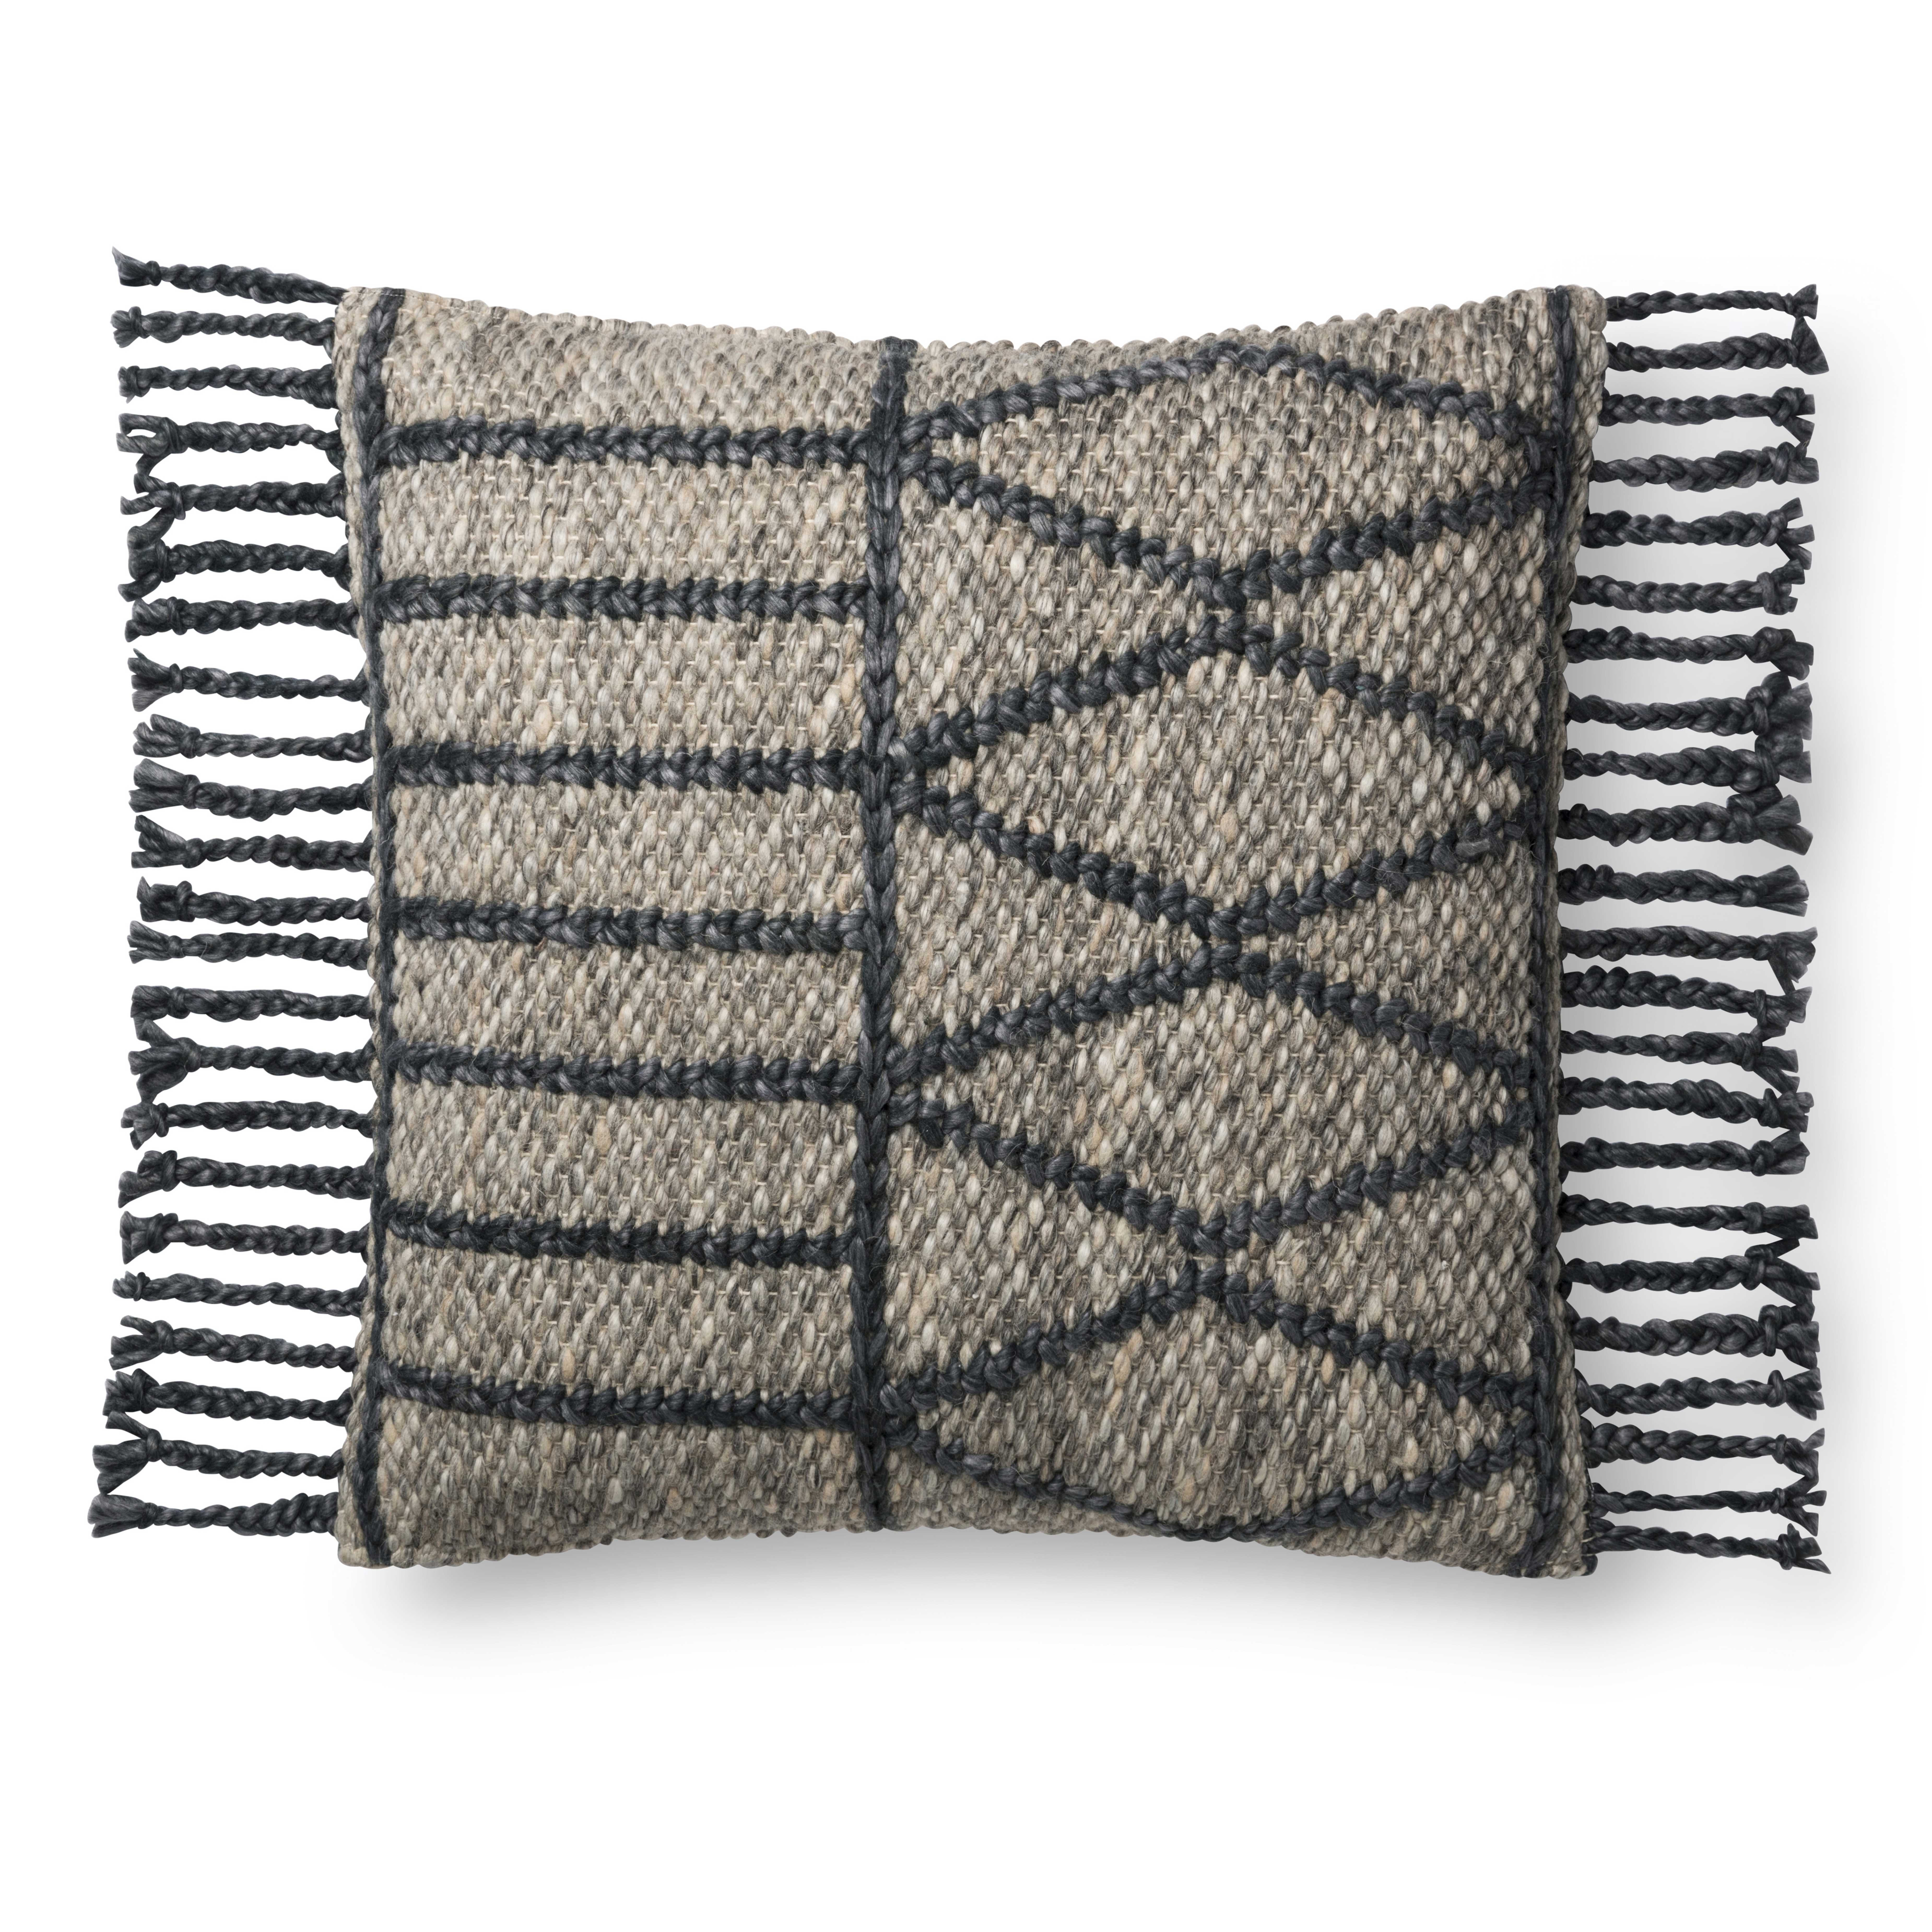 Magnolia Home by Joanna Gaines PILLOWS P1101 GREY / NAVY 22" x 22" Cover Only - Magnolia Home by Joana Gaines Crafted by Loloi Rugs